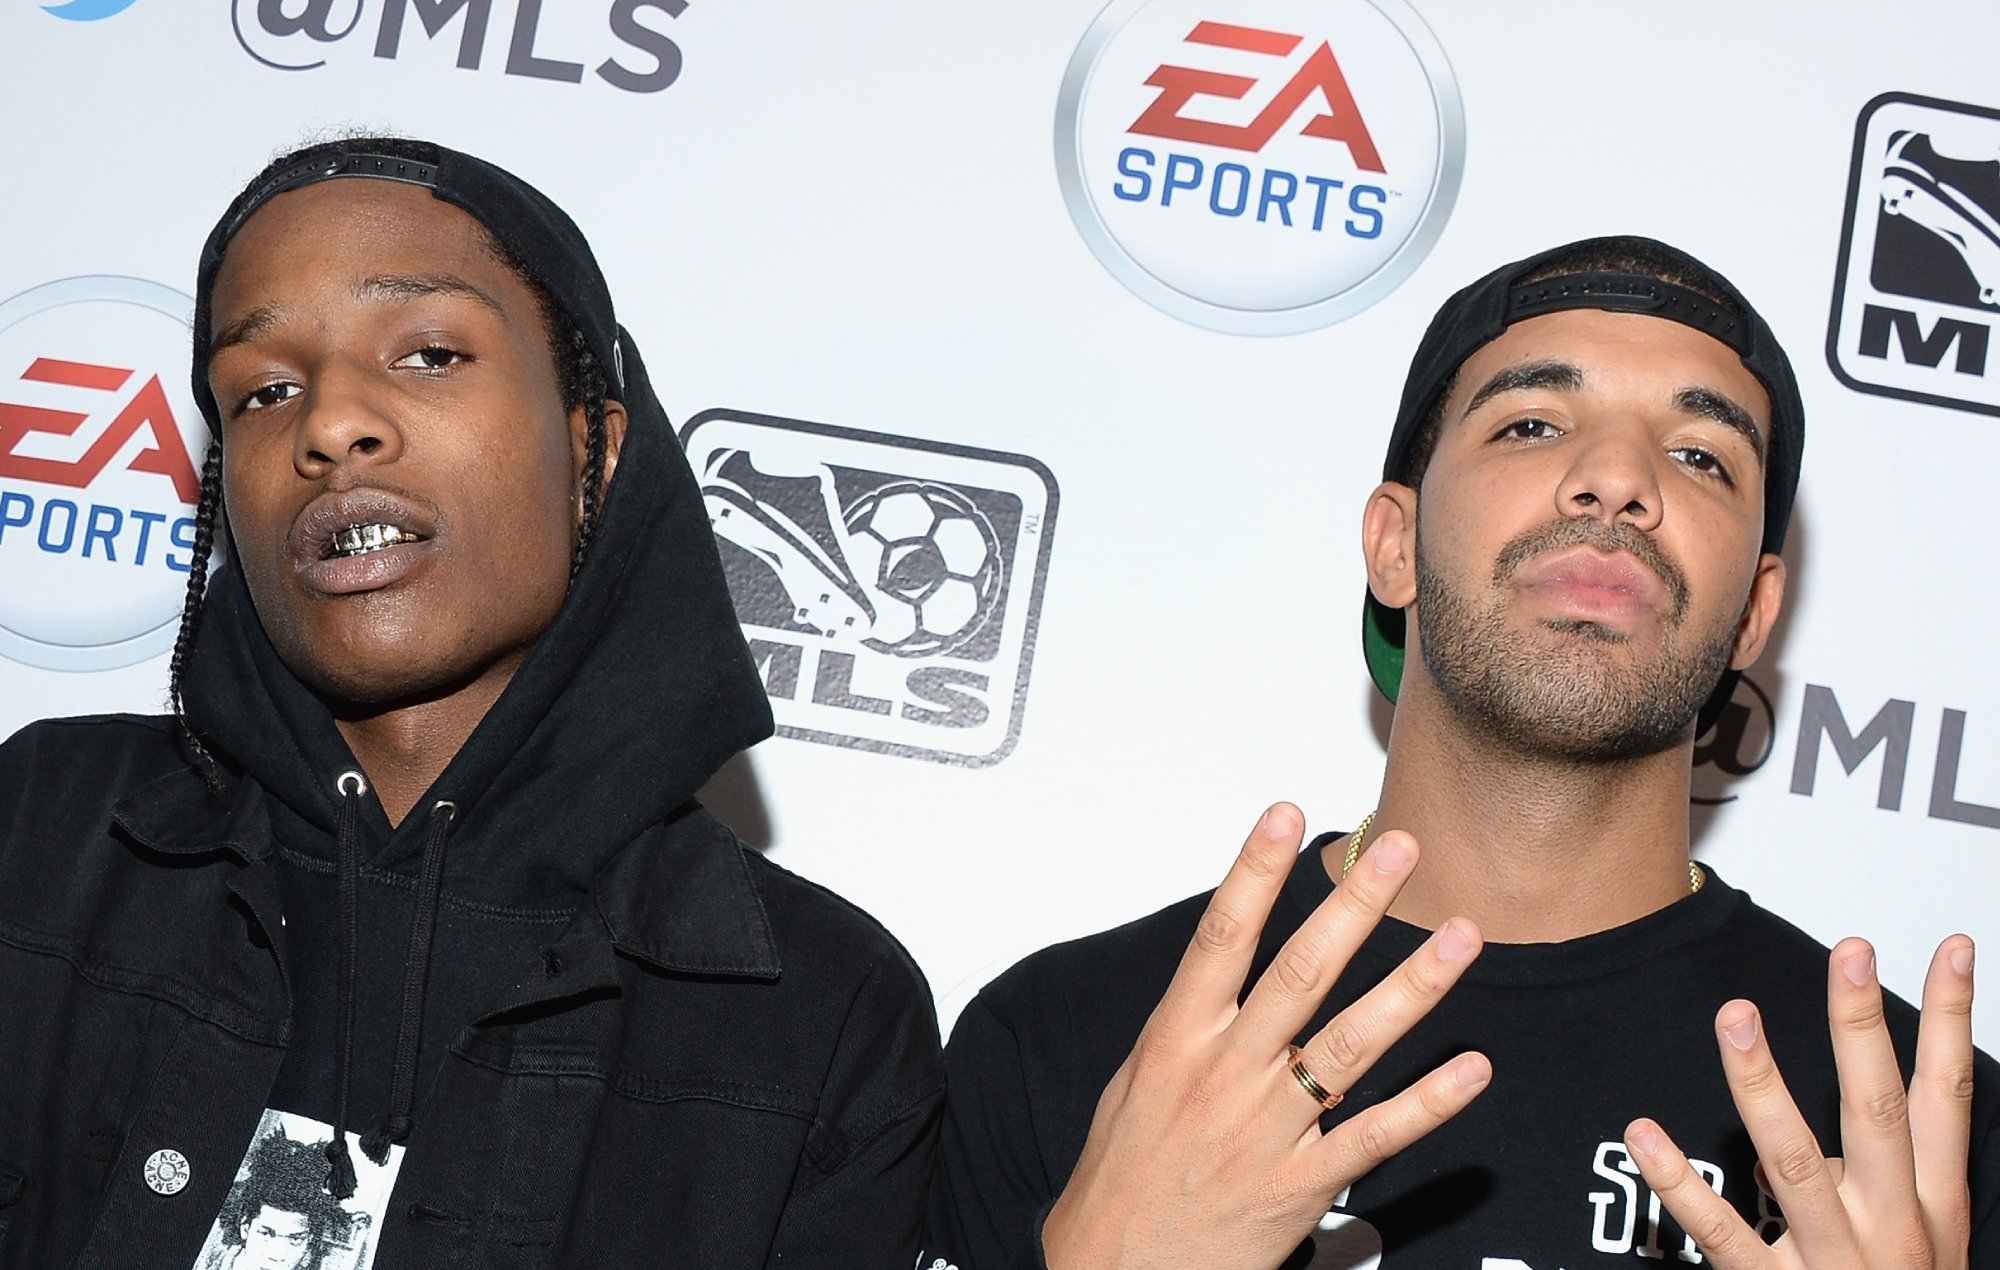 A$AP Rocky will reportedly respond to Drake disses on upcoming album